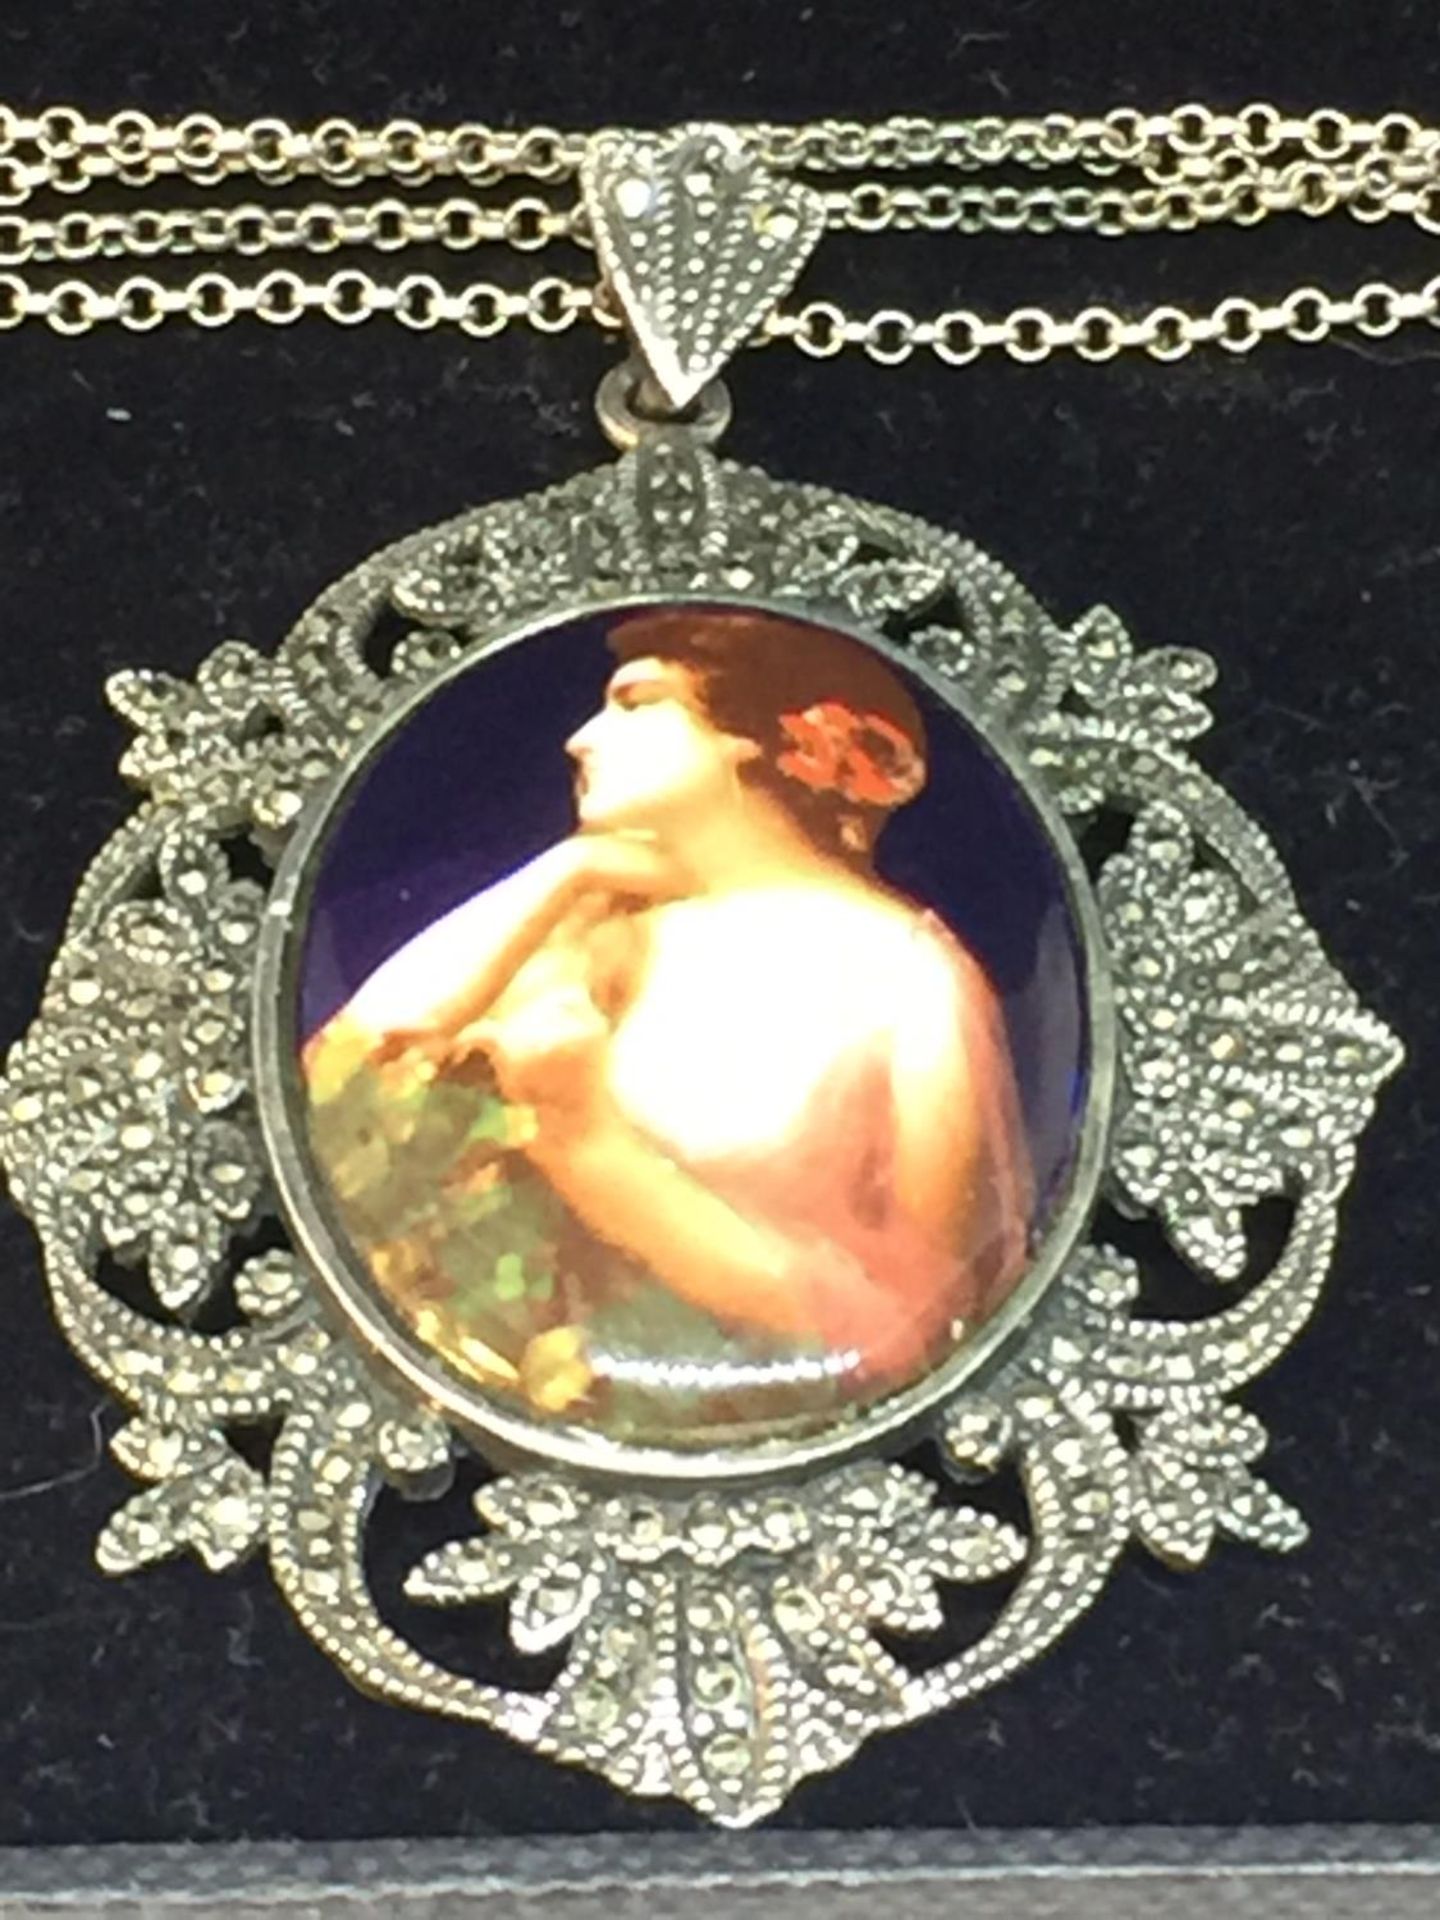 A SILVER NECKLACE WITH PORTRAIT PENDANT IN A PRESENTATION BOX - Image 2 of 3